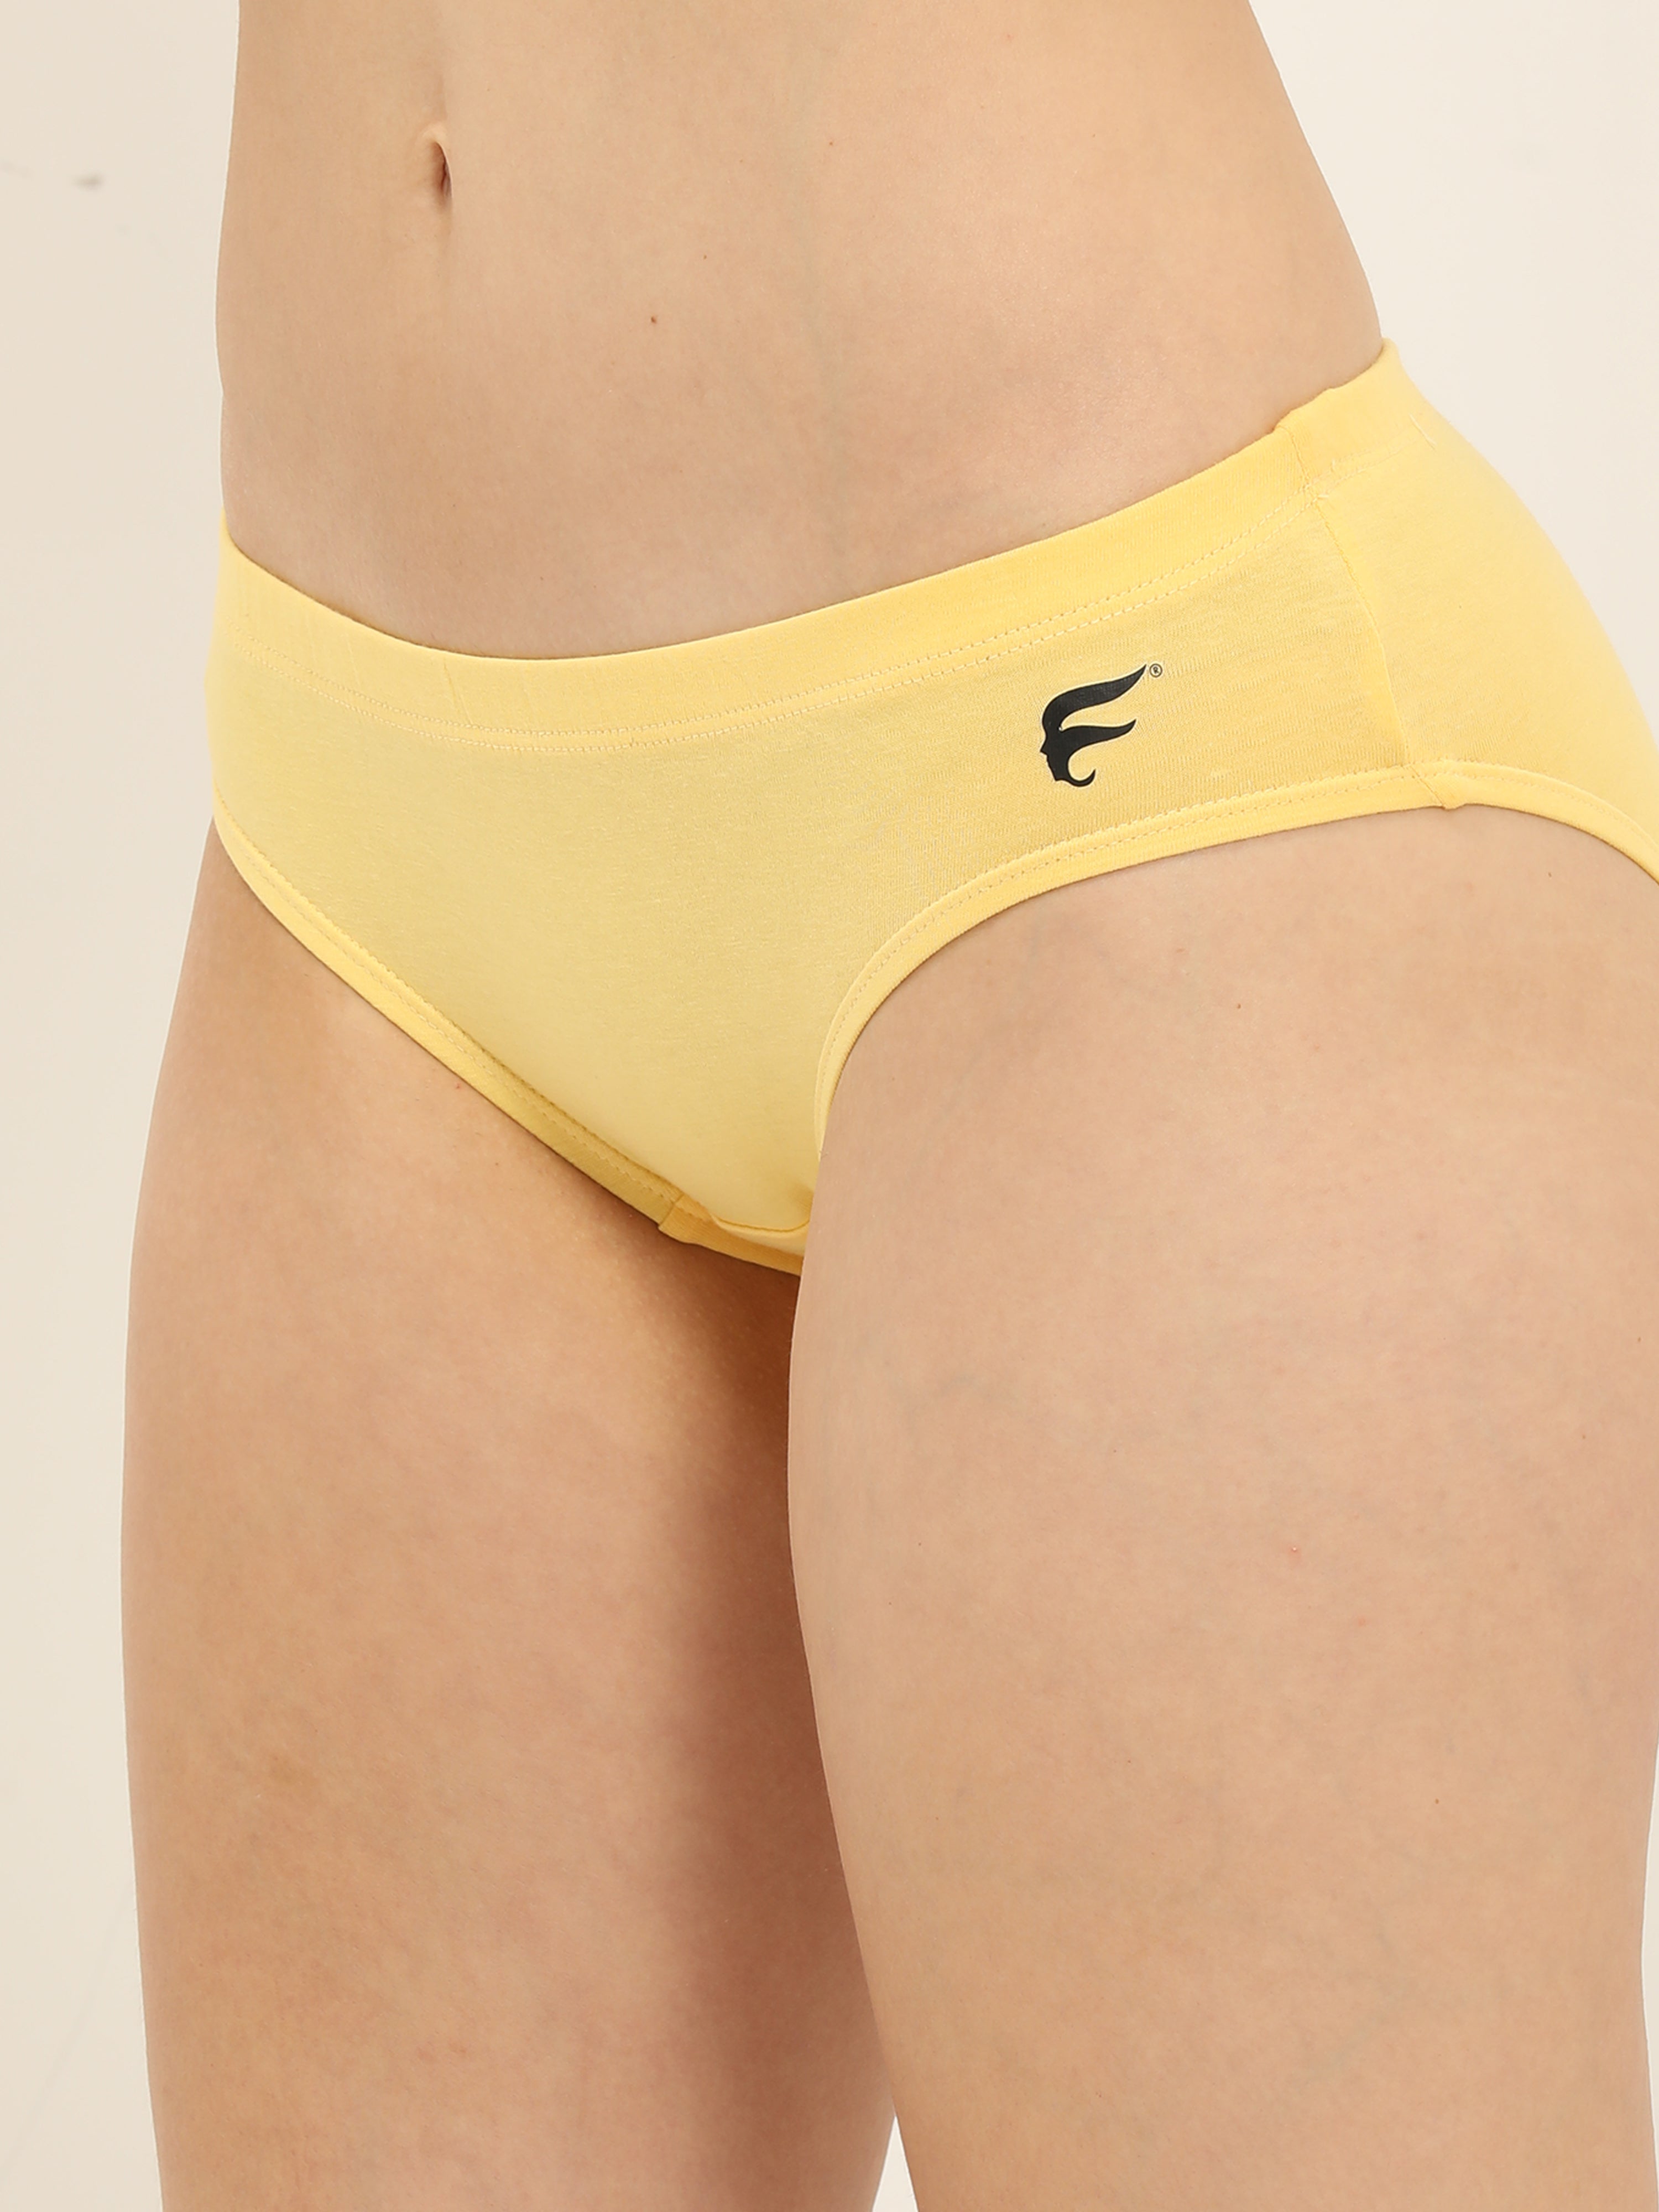 Envie Brief, Low rise panty (Pack of 3) Combo  yellow, Navy, Plum